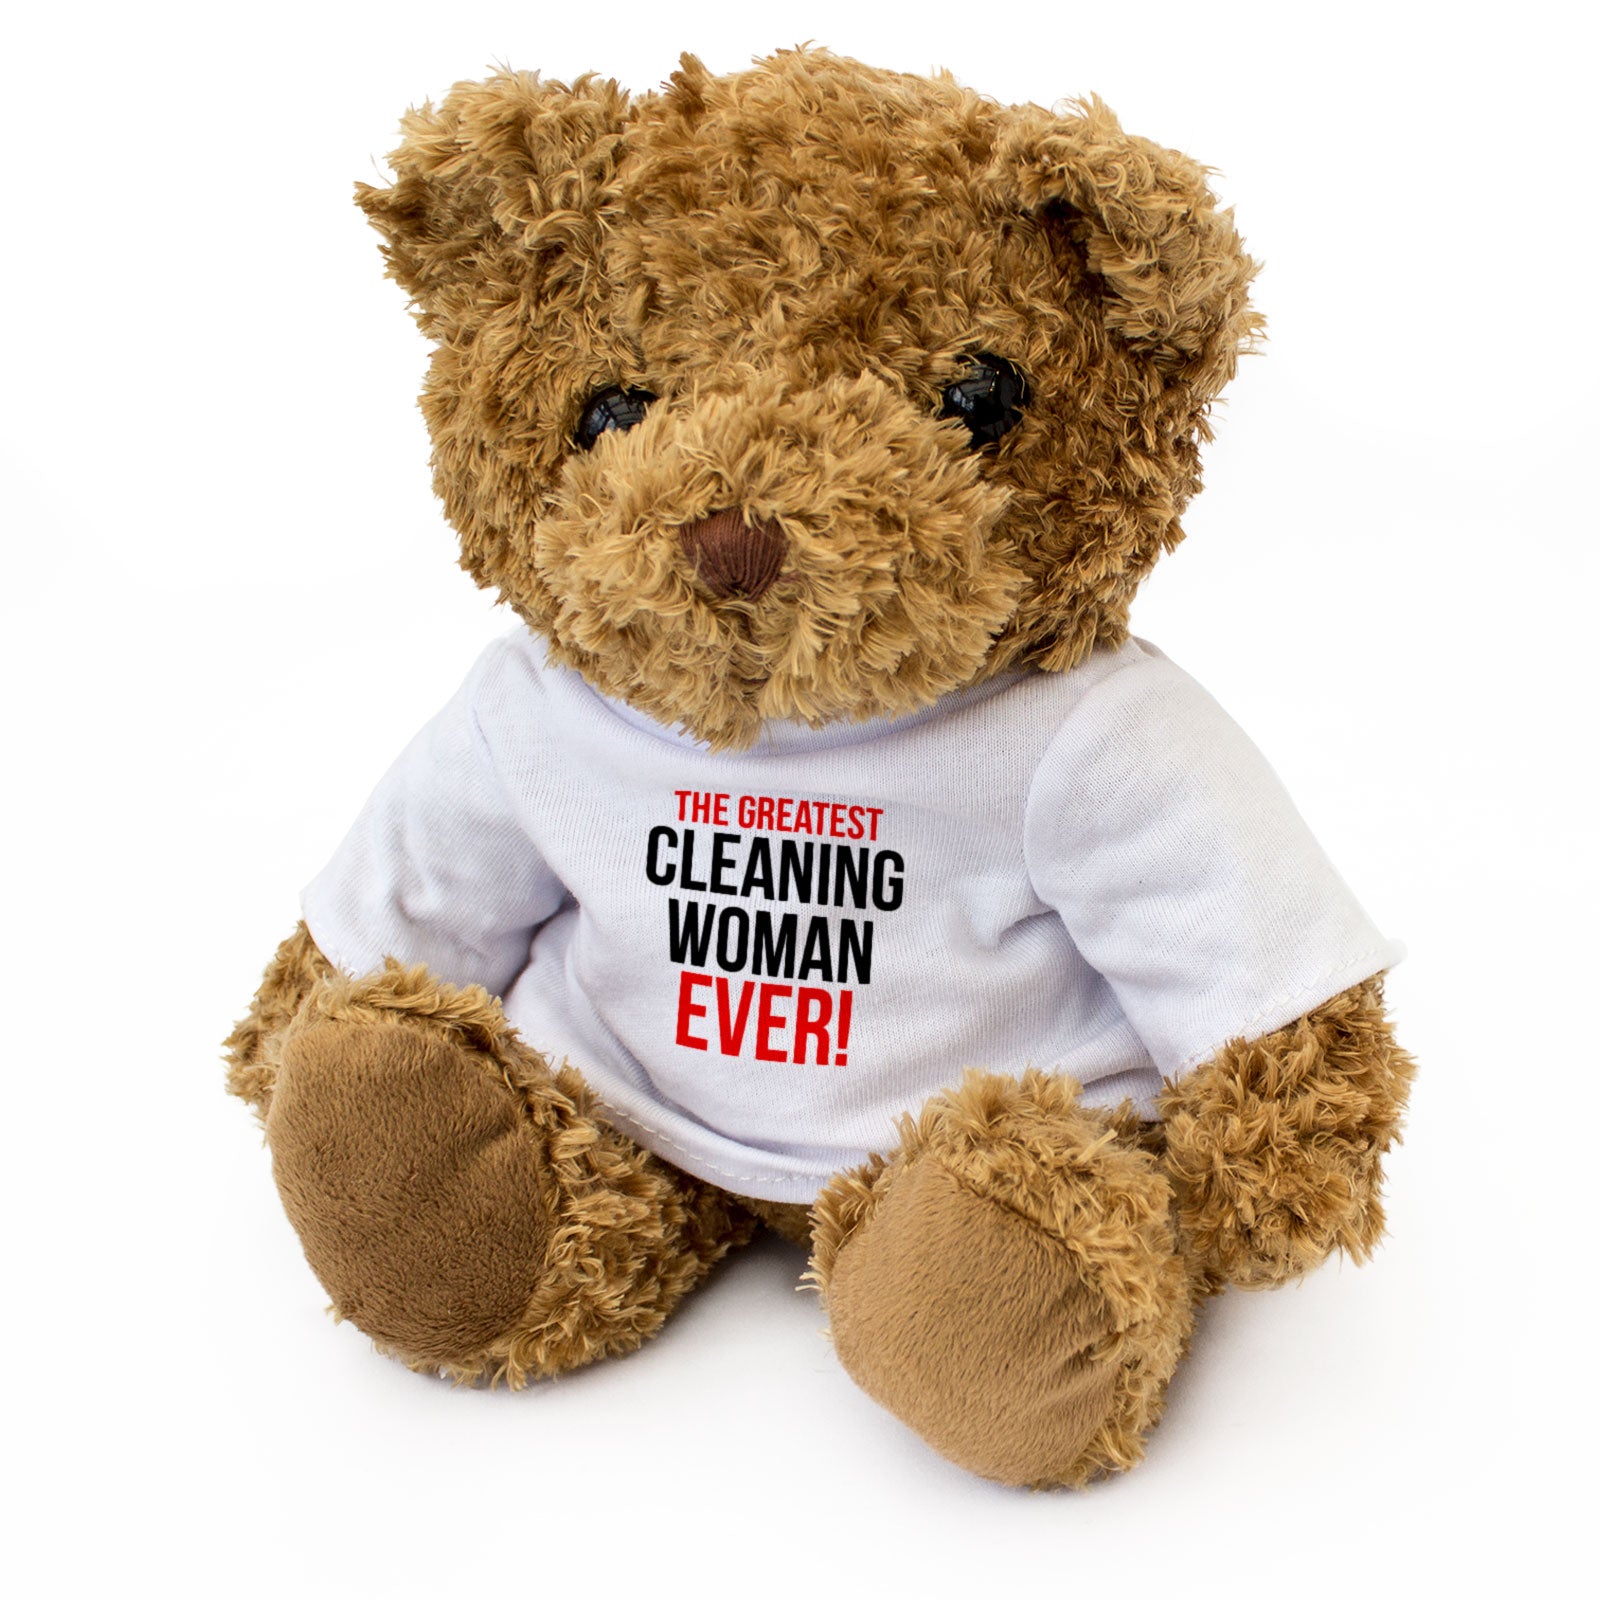 The Greatest Cleaning Woman Ever - Teddy Bear